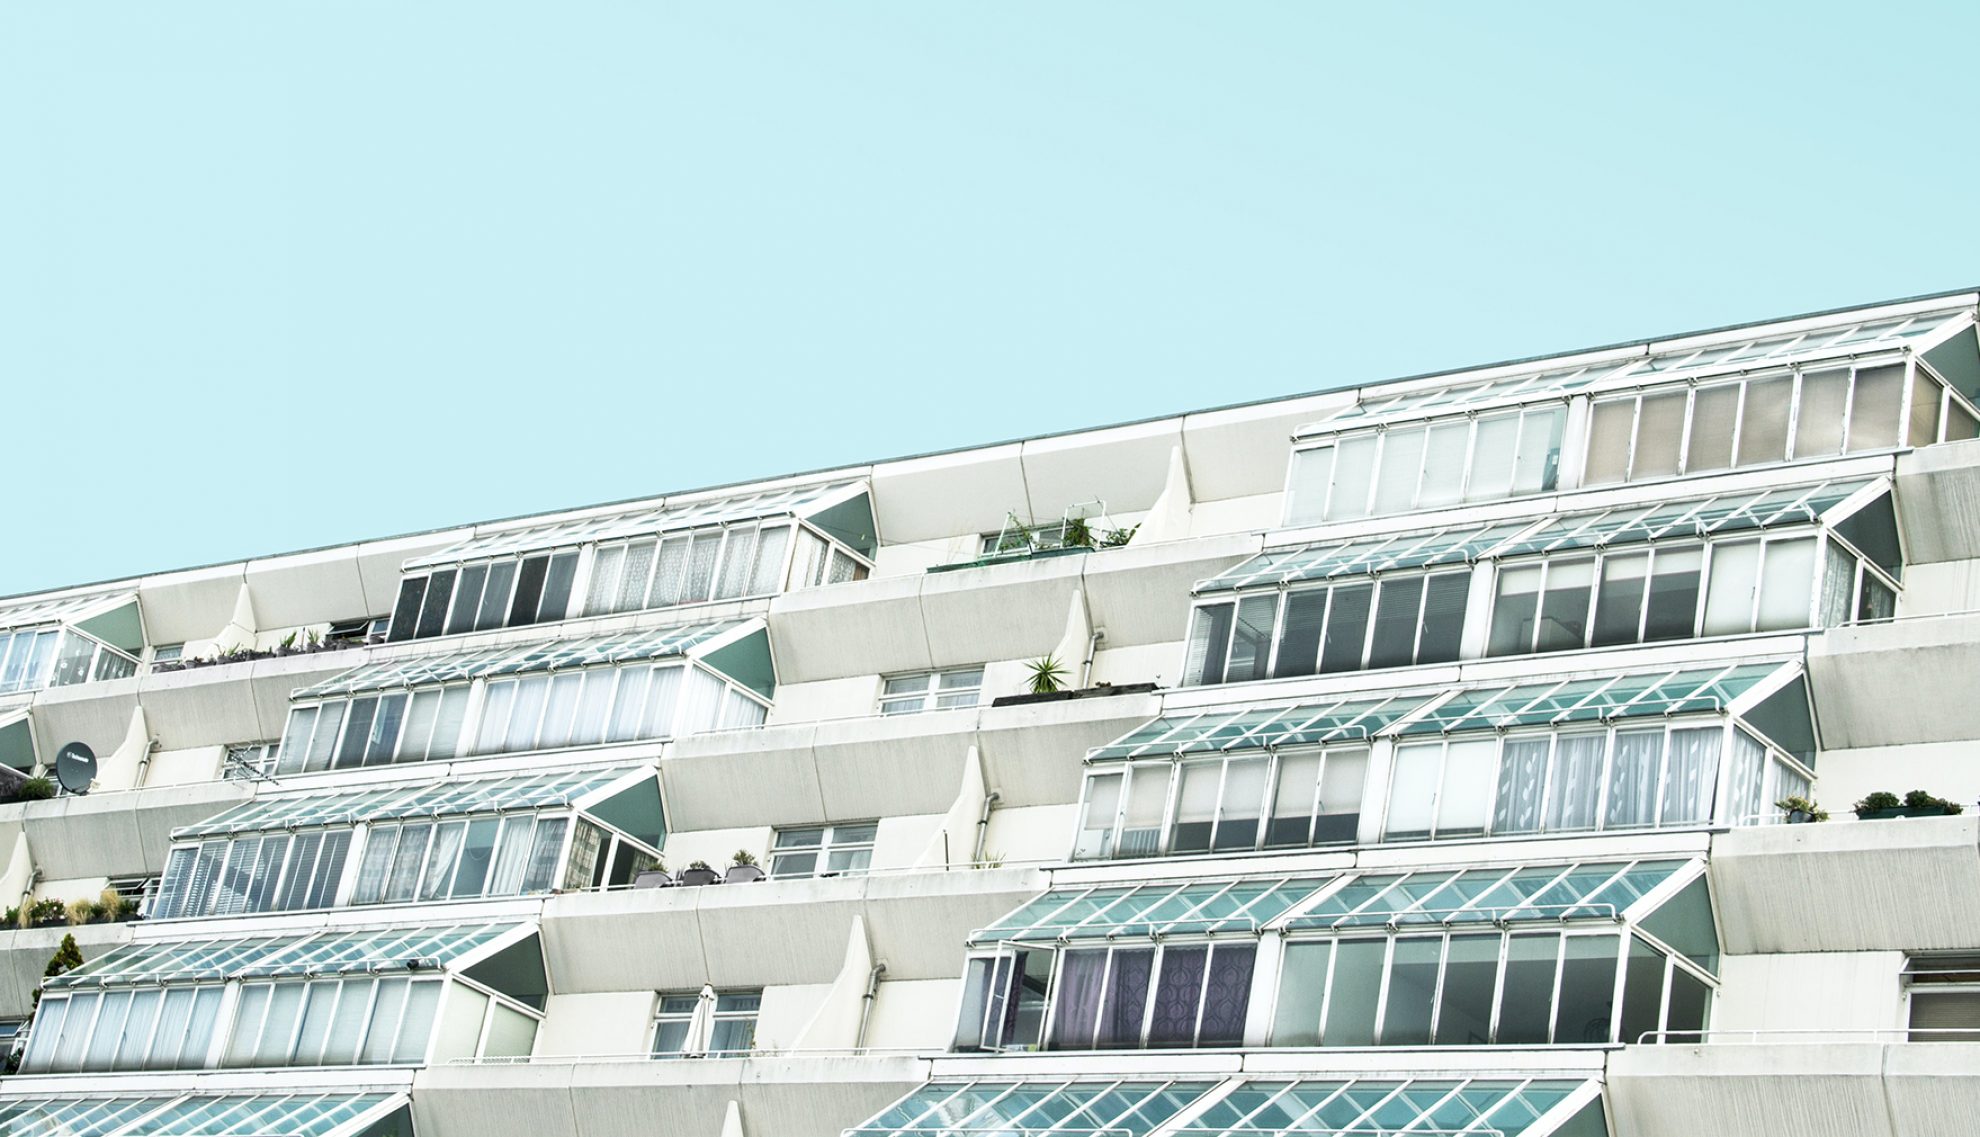 The Brunswick Centre social housing in Bloomsbury, London